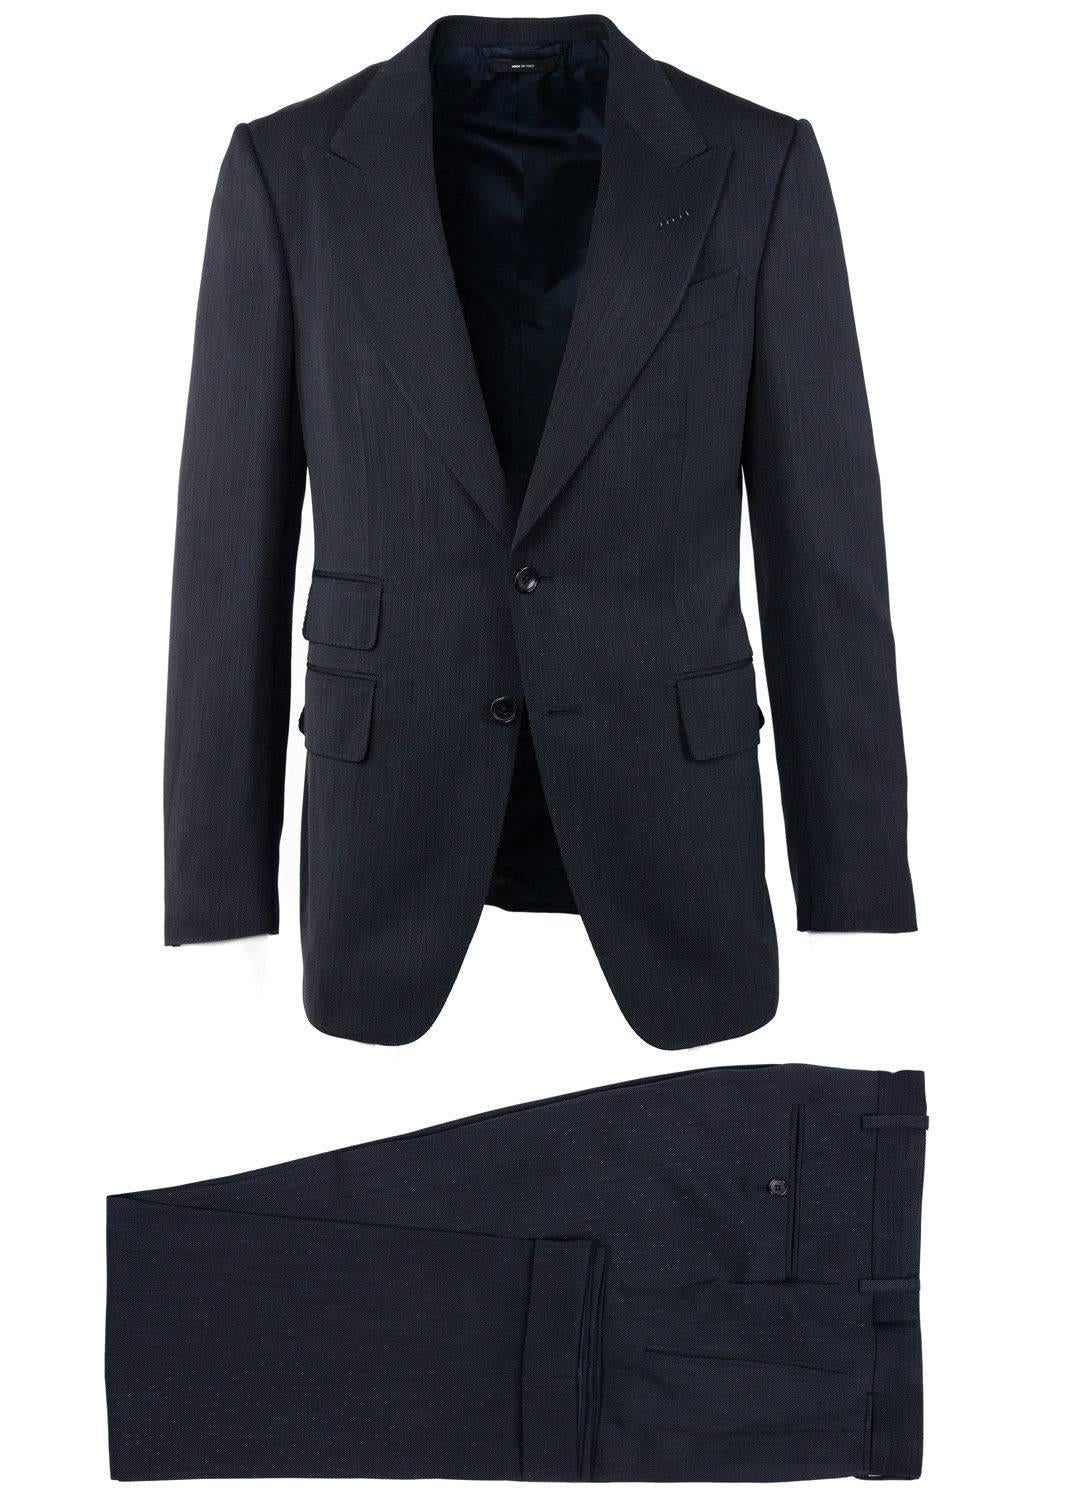 The best way to seal the deal is in your Tom Ford Shelton Suit. This impeccable two piece features a subtle micro stripe texture, peaked lapels, and dark grey marbled buttons. You can pair this suit with a crisp button down for minimalist